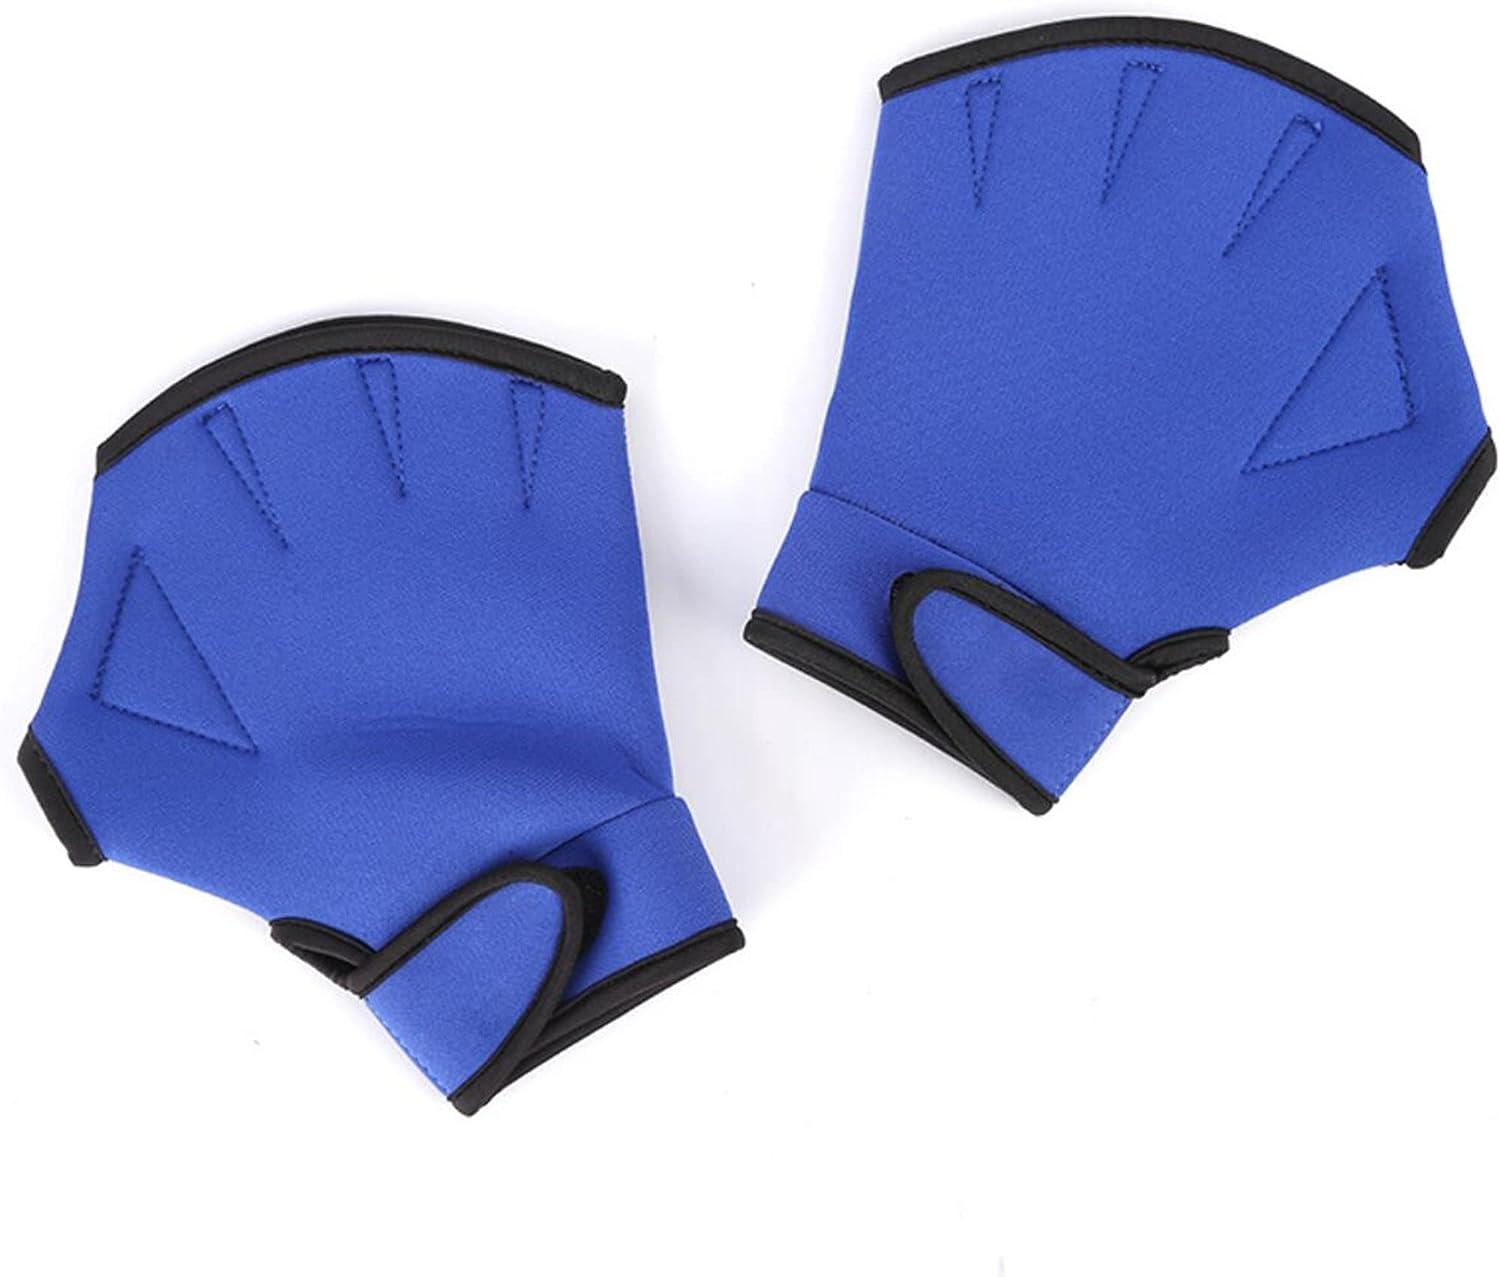  EXCEREY Swimming Gloves Silicone Webbed Swim Training Gloves  Web Gloves Swimming Water Gloves For Kids